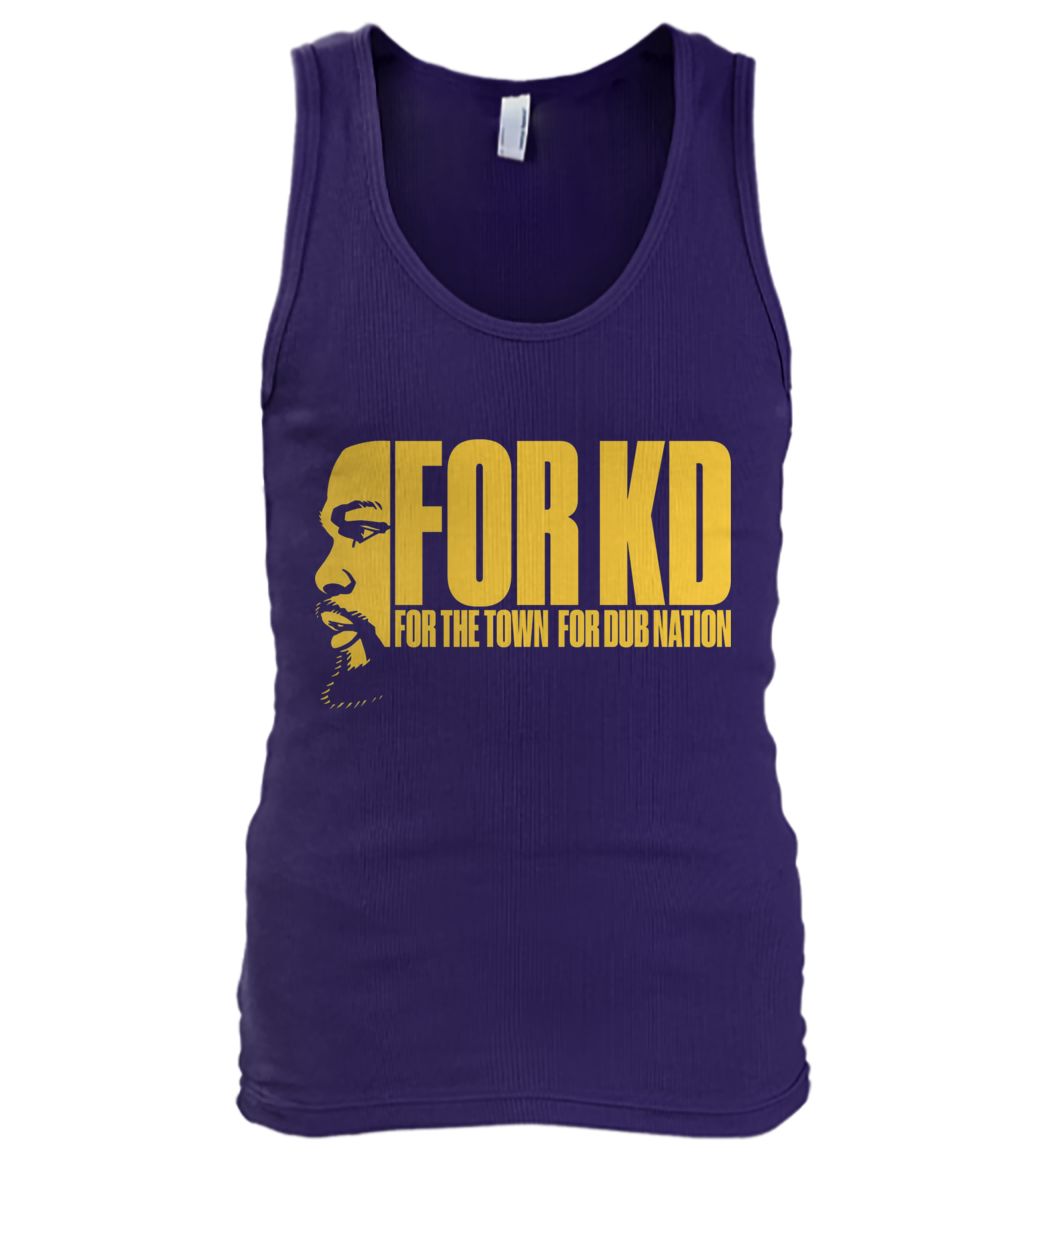 For KD for the town for dub nation men's tank top